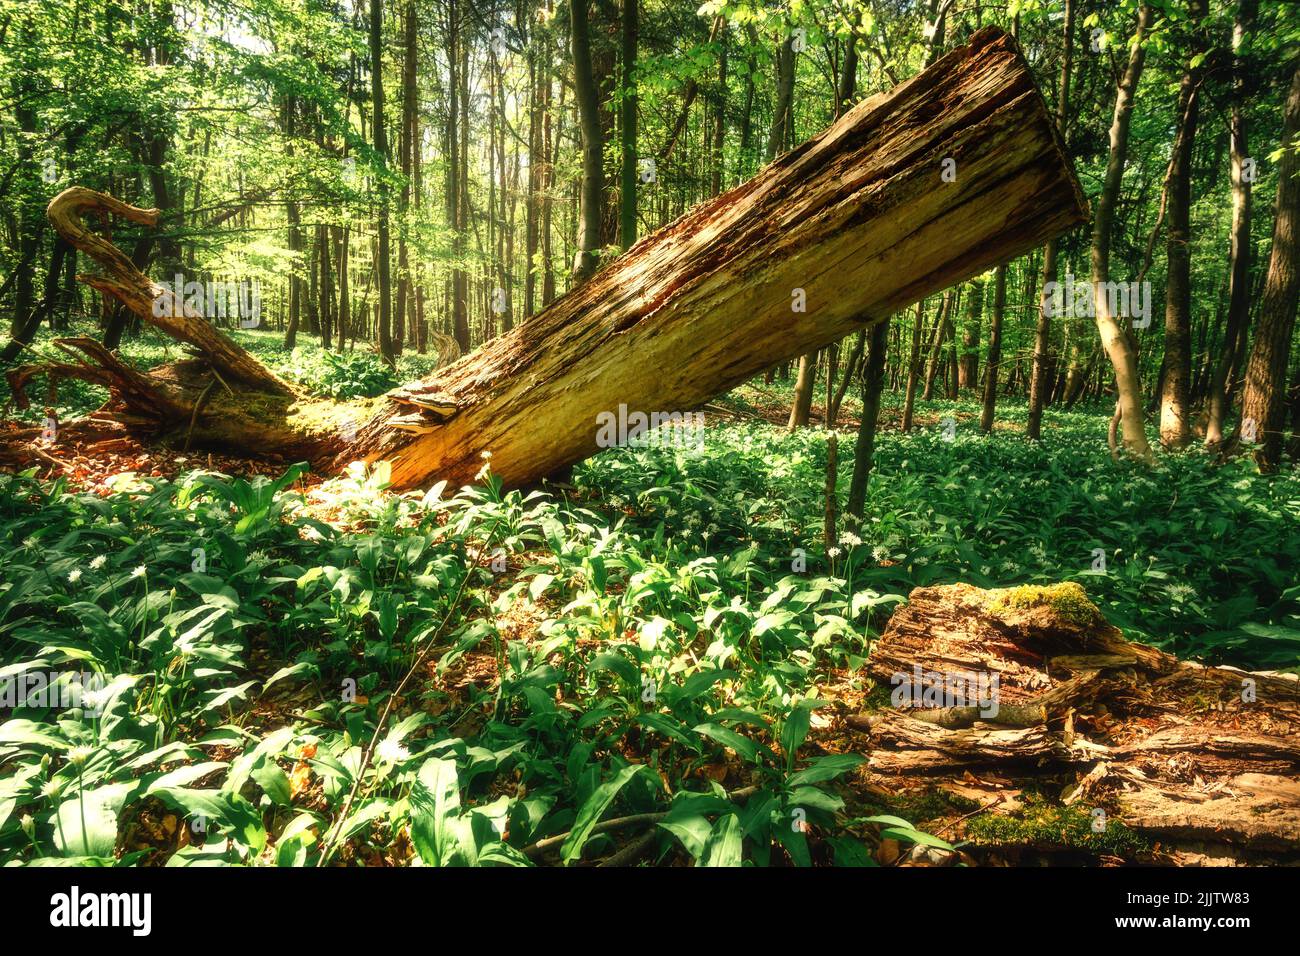 Old ailing tree lies in a forest full of wild garlic. Germany harzmountains Stock Photo